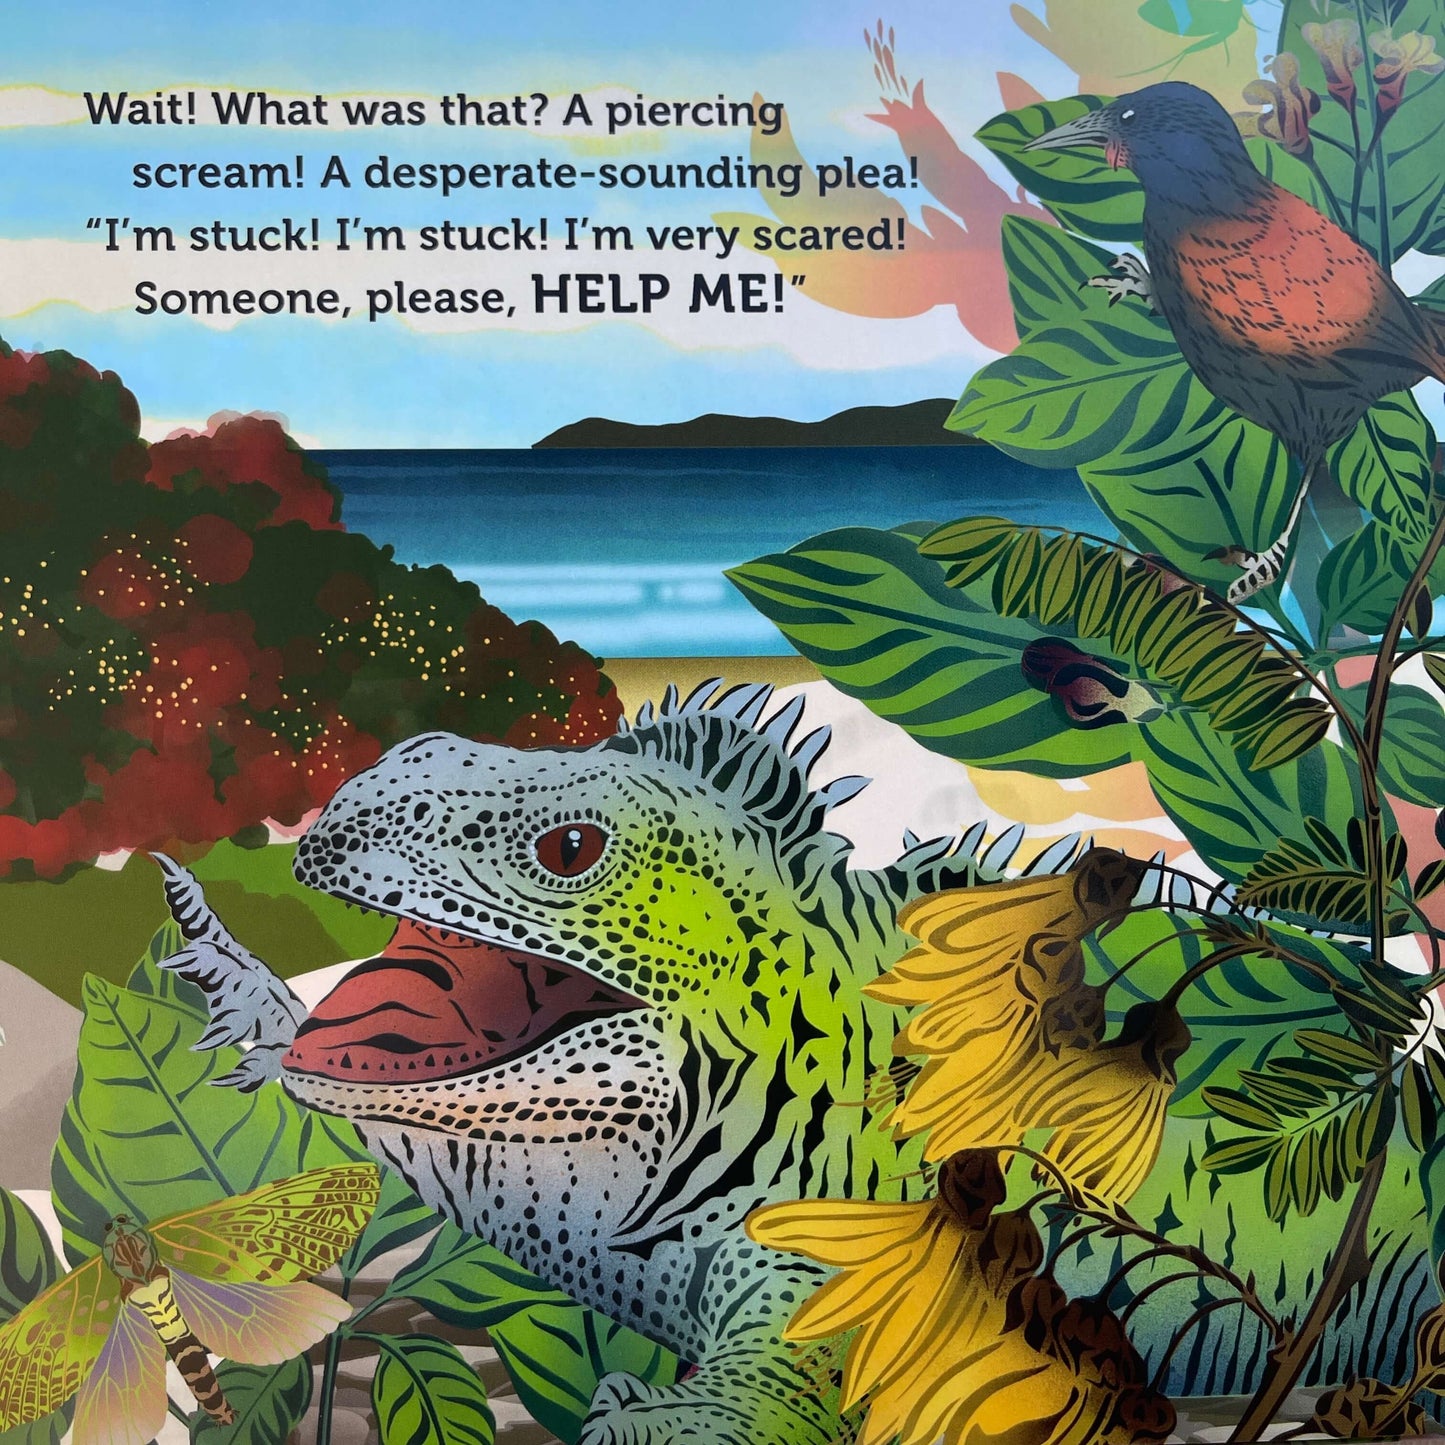 Page from Children's book Tu Meke Tuatara by Malcolm Clarke and illustrated by Flox.